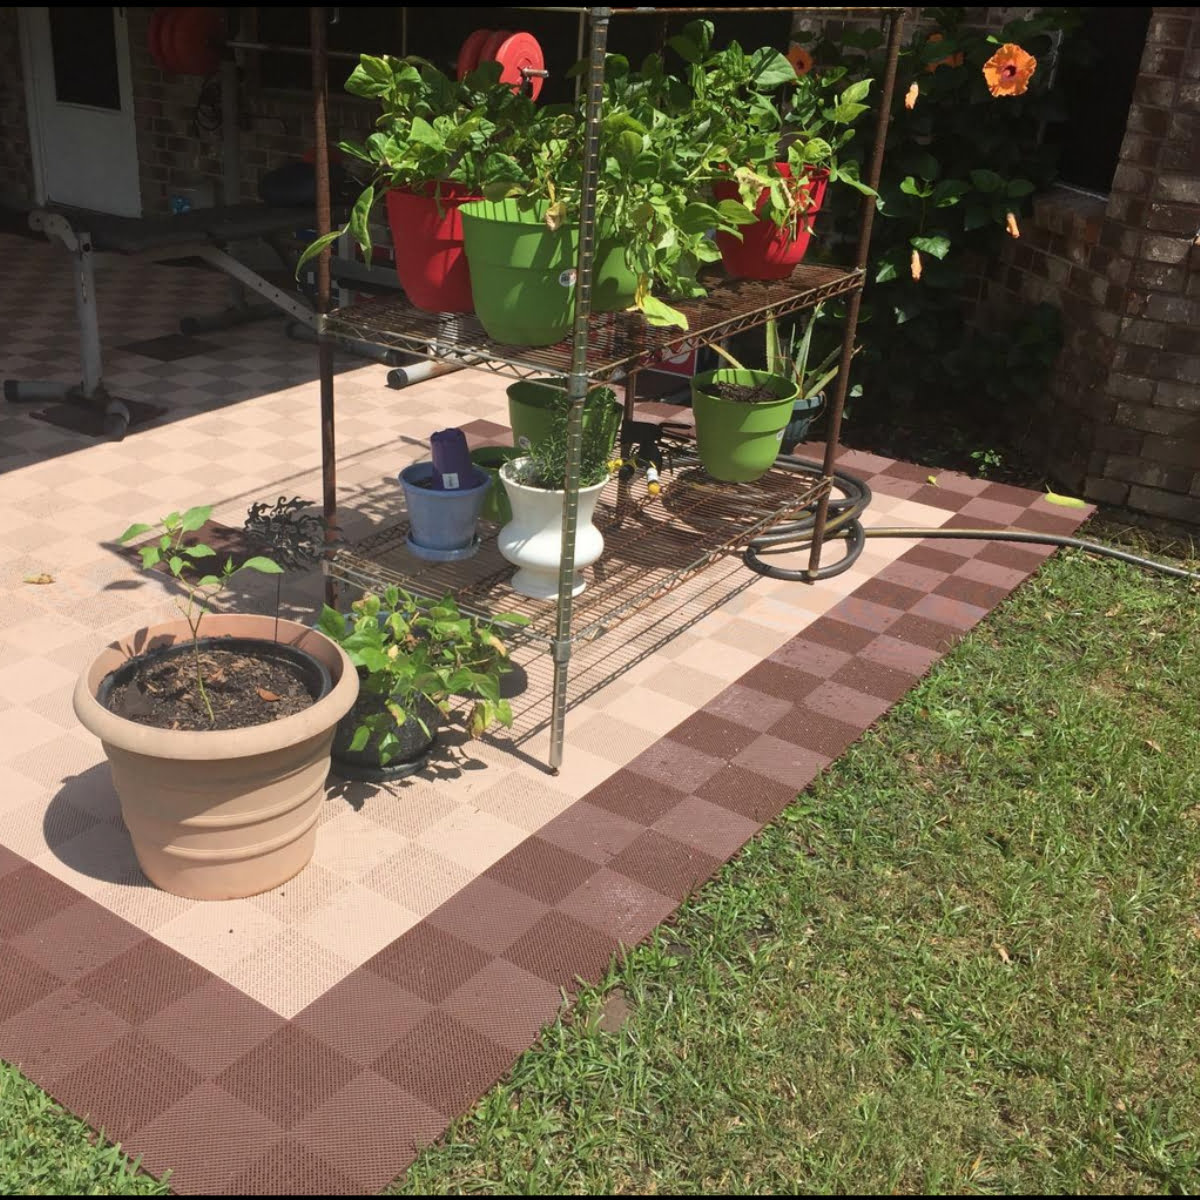 Patio Tiles using Perforated beige and brown